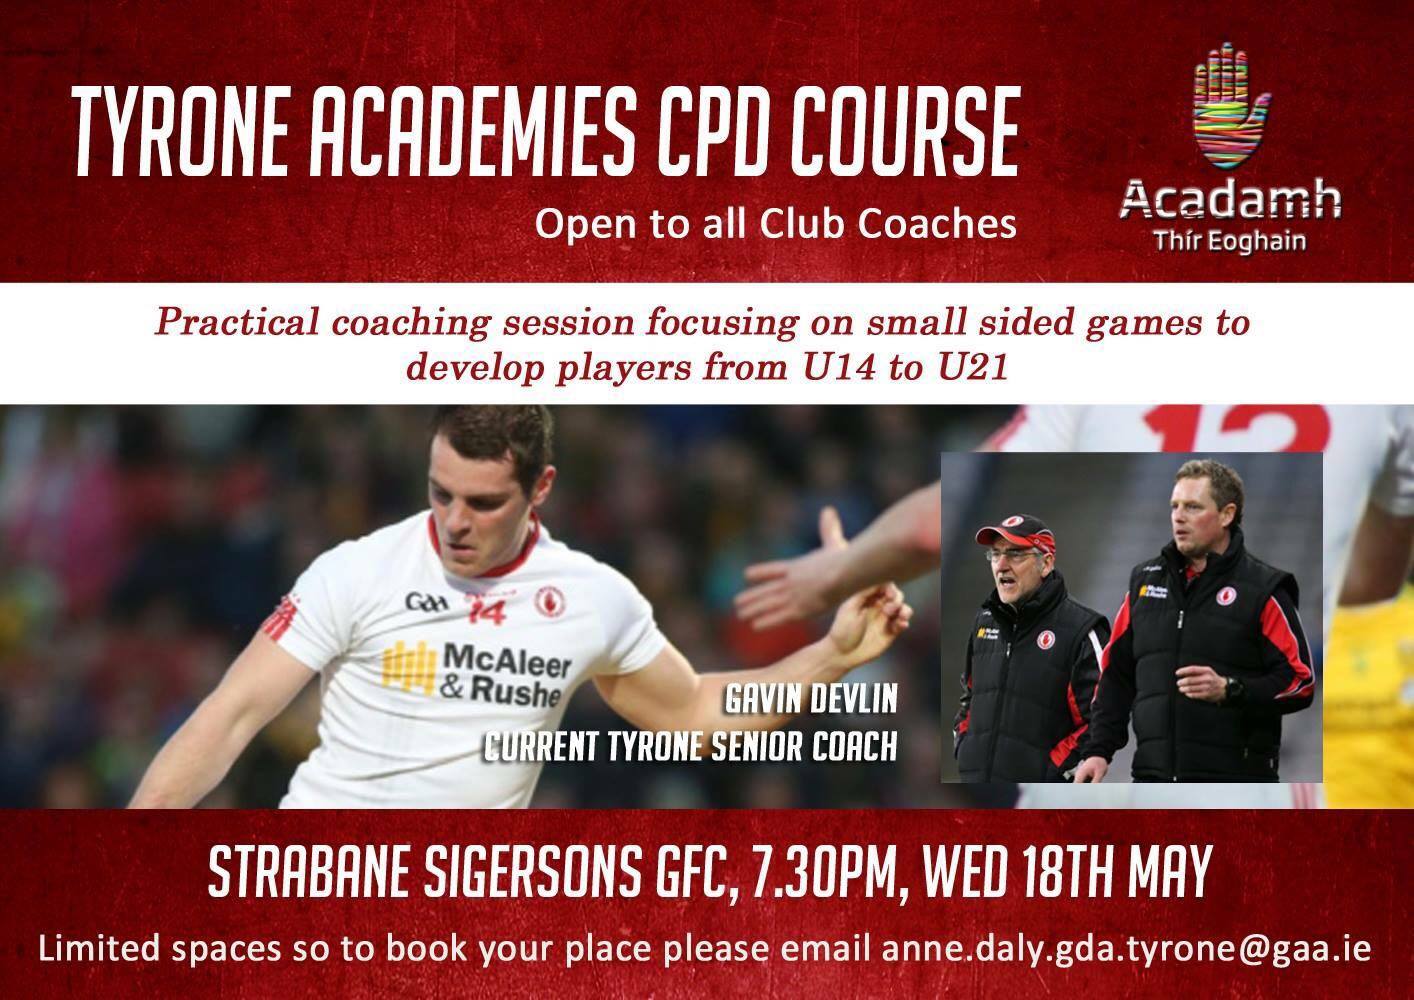 Academy Tyrone CPD Course – Wednesday 18th in Strabane